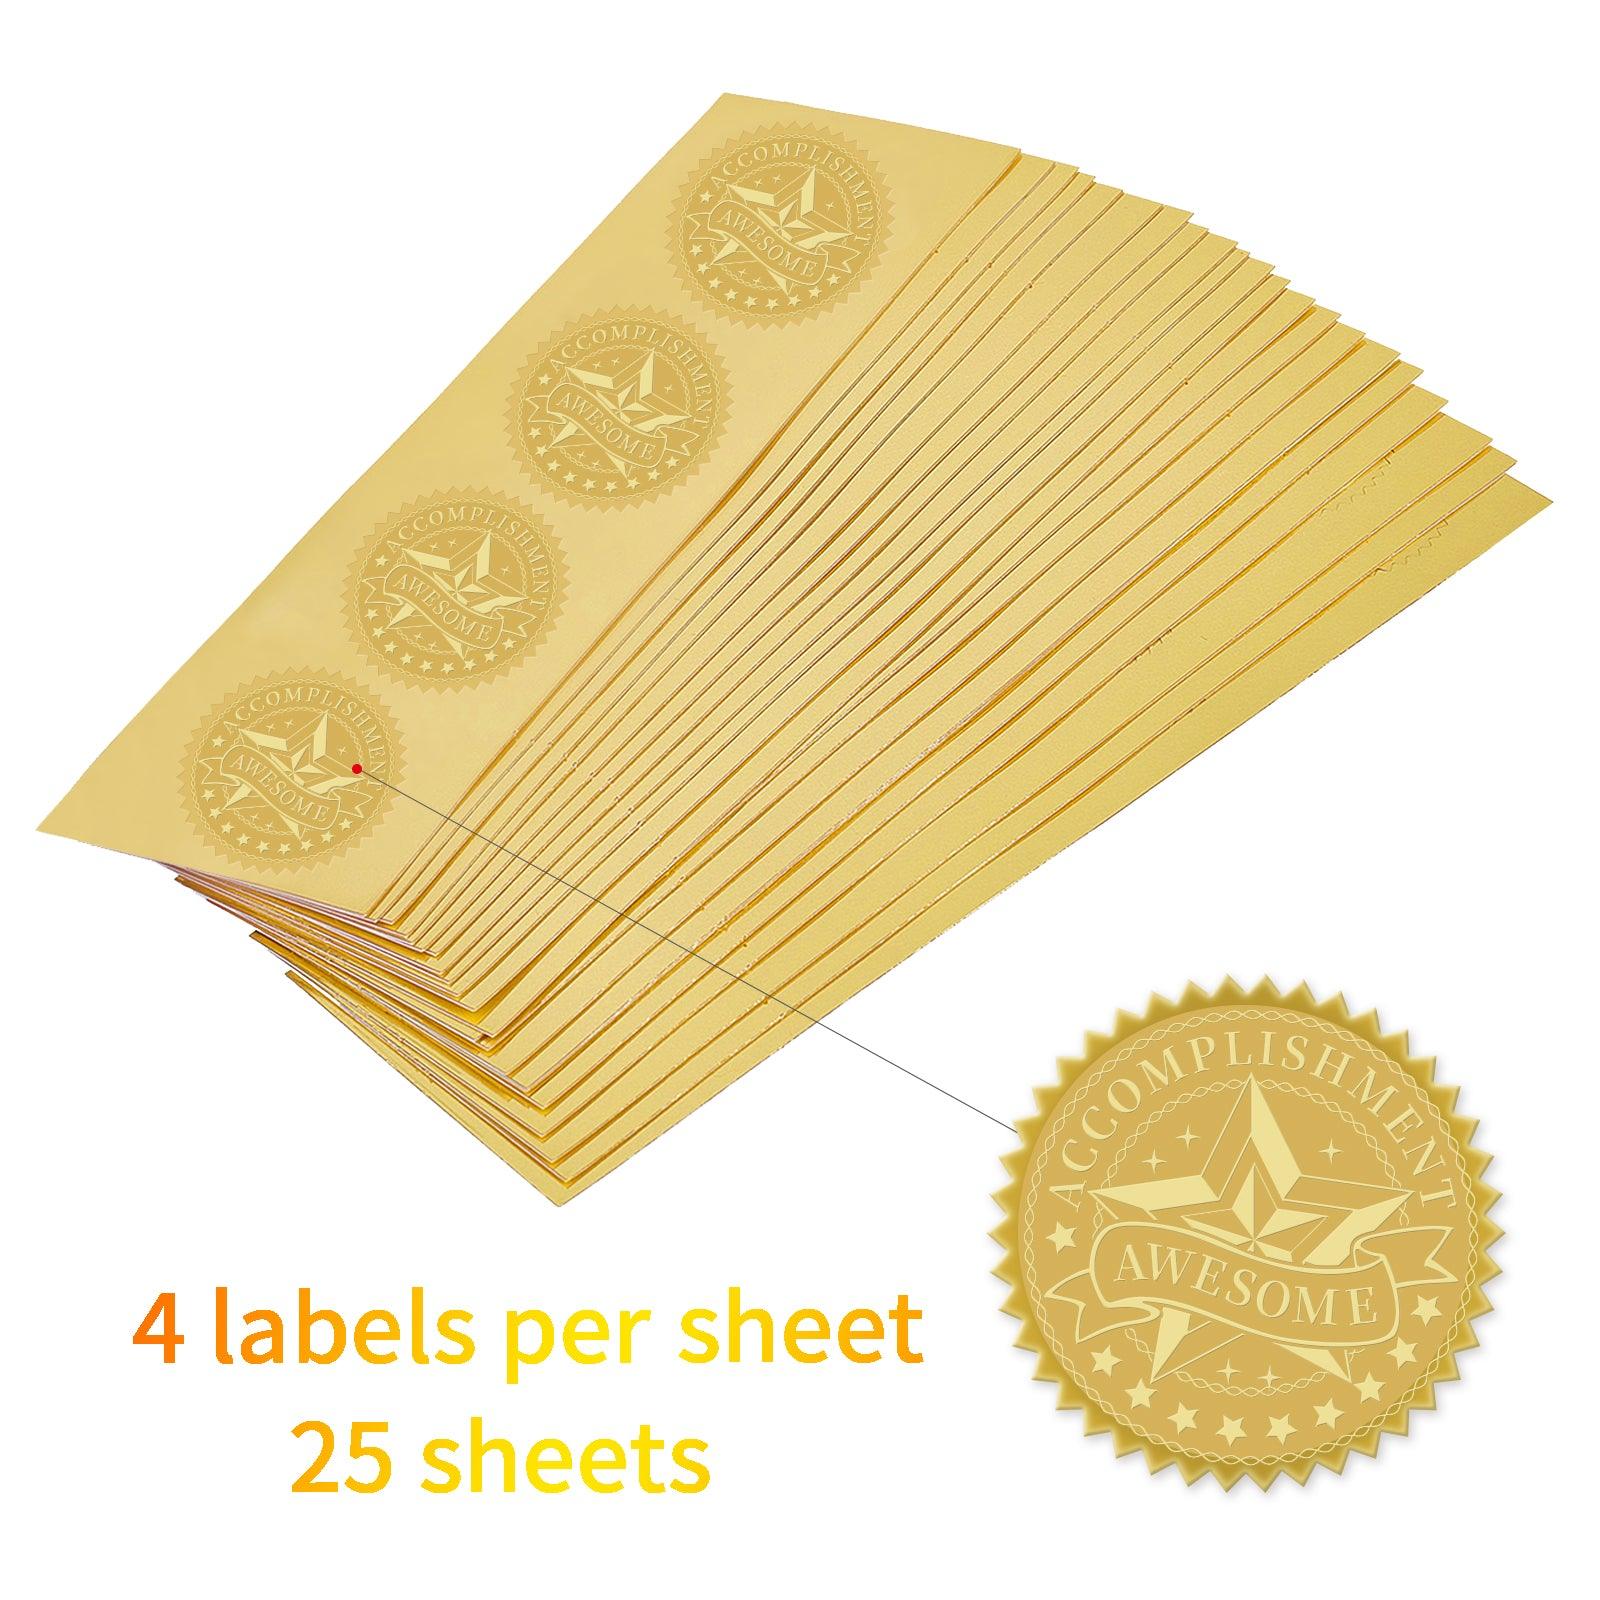 CRASPIRE 100pcs Embossed Gold Foil ACCOMPLISHMENT AWESOME Seals Self  Adhesive Stickers